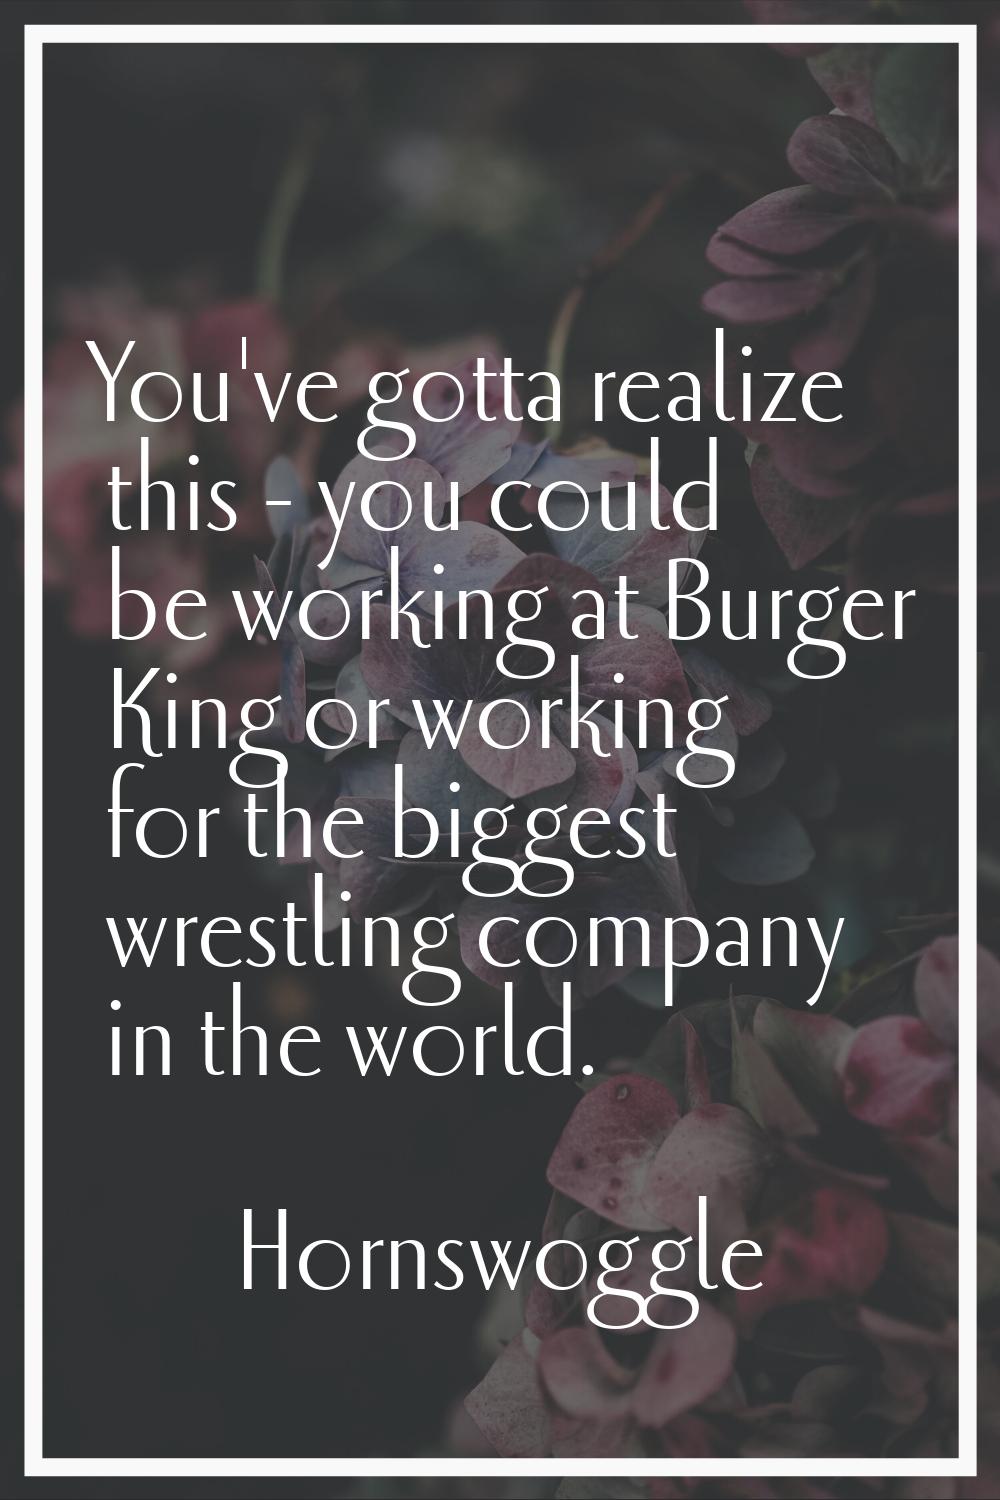 You've gotta realize this - you could be working at Burger King or working for the biggest wrestlin